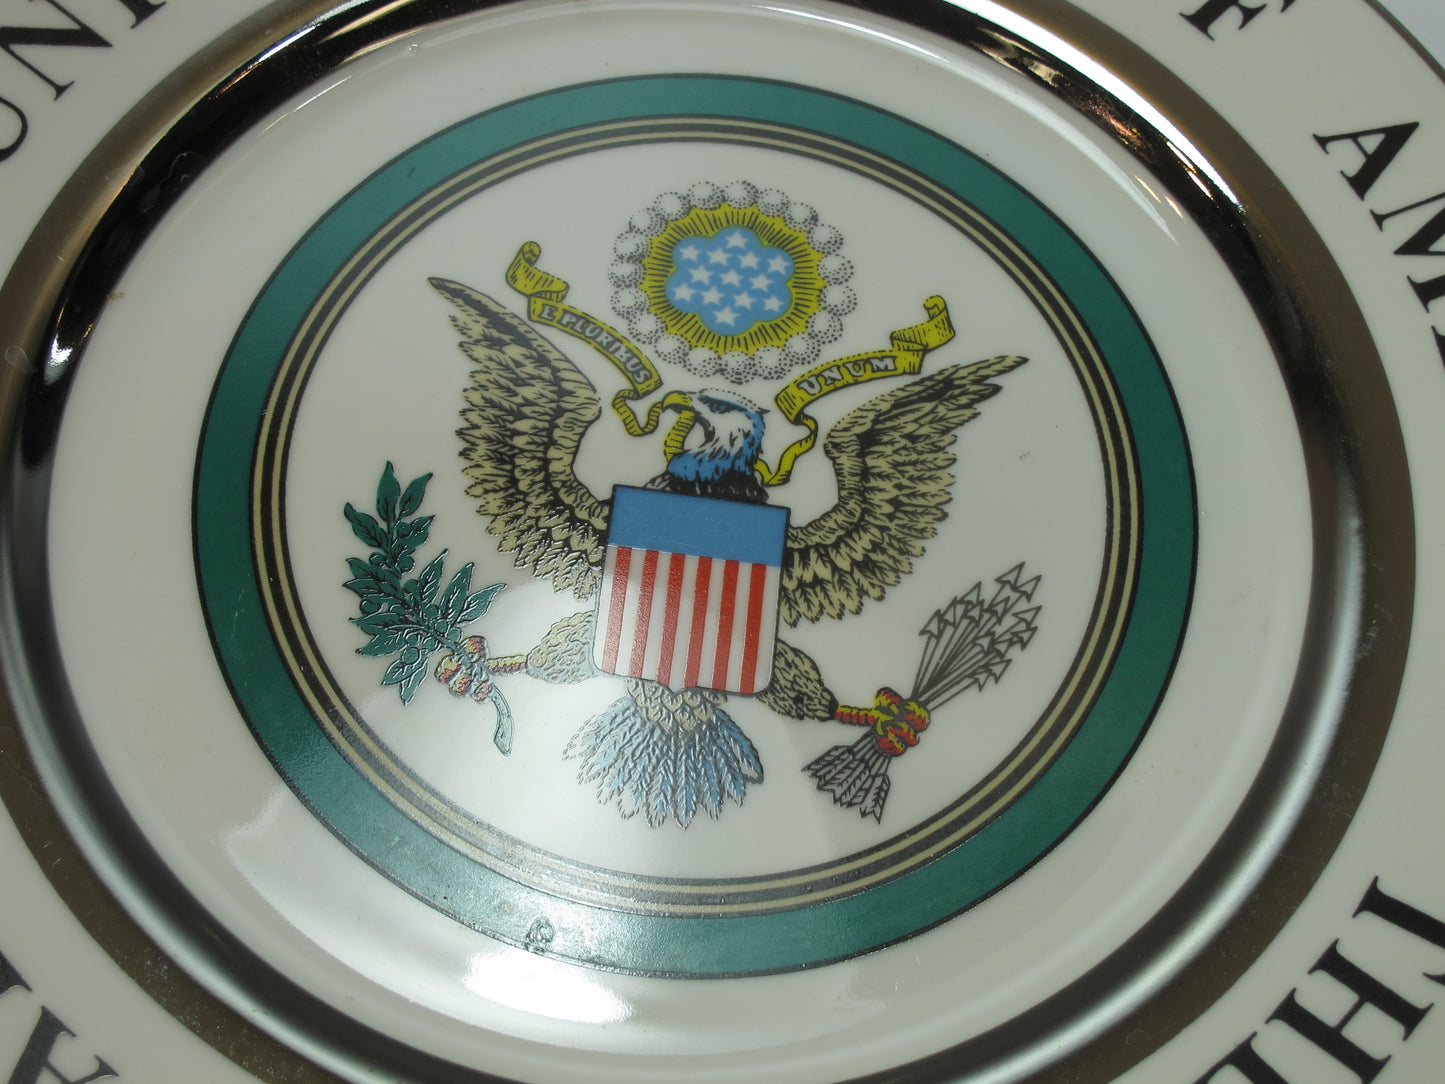 The great seal of the United states of america plate